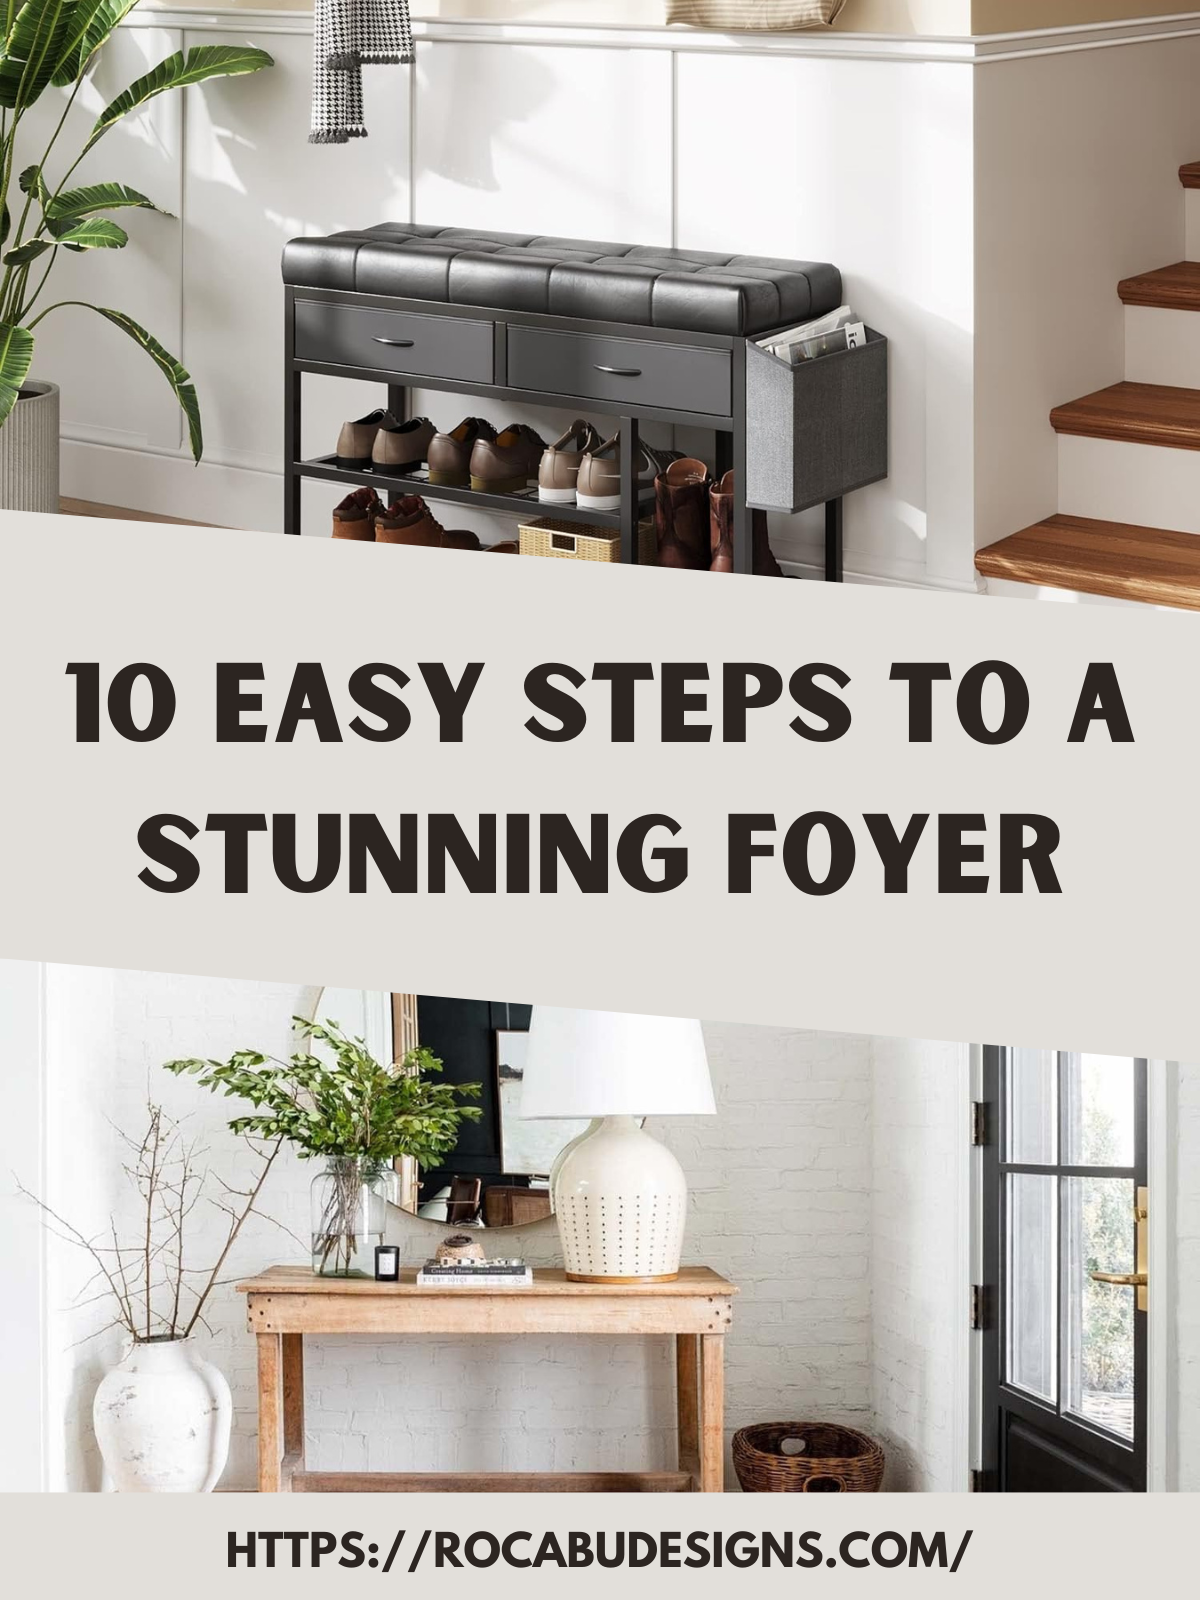 10 Easy Steps to a Stunning Foyer